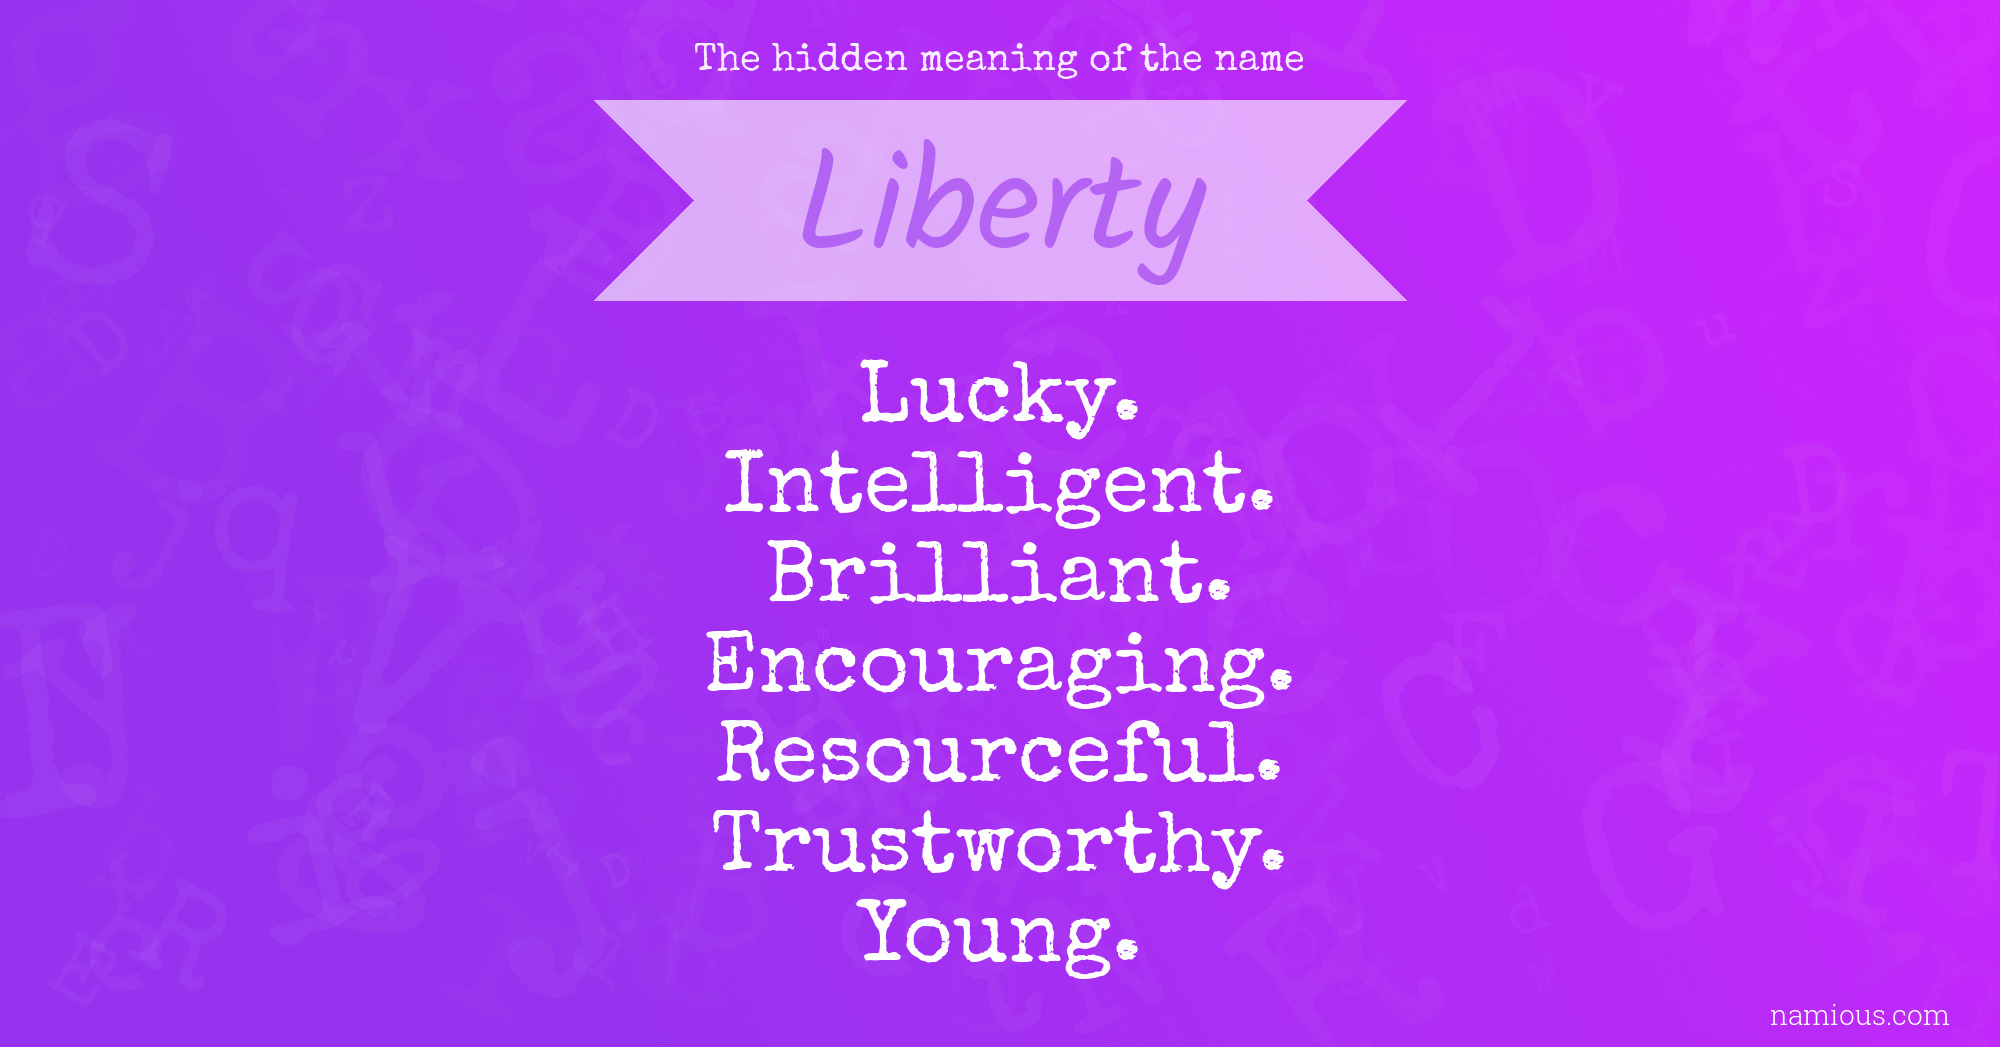 The hidden meaning of the name Liberty